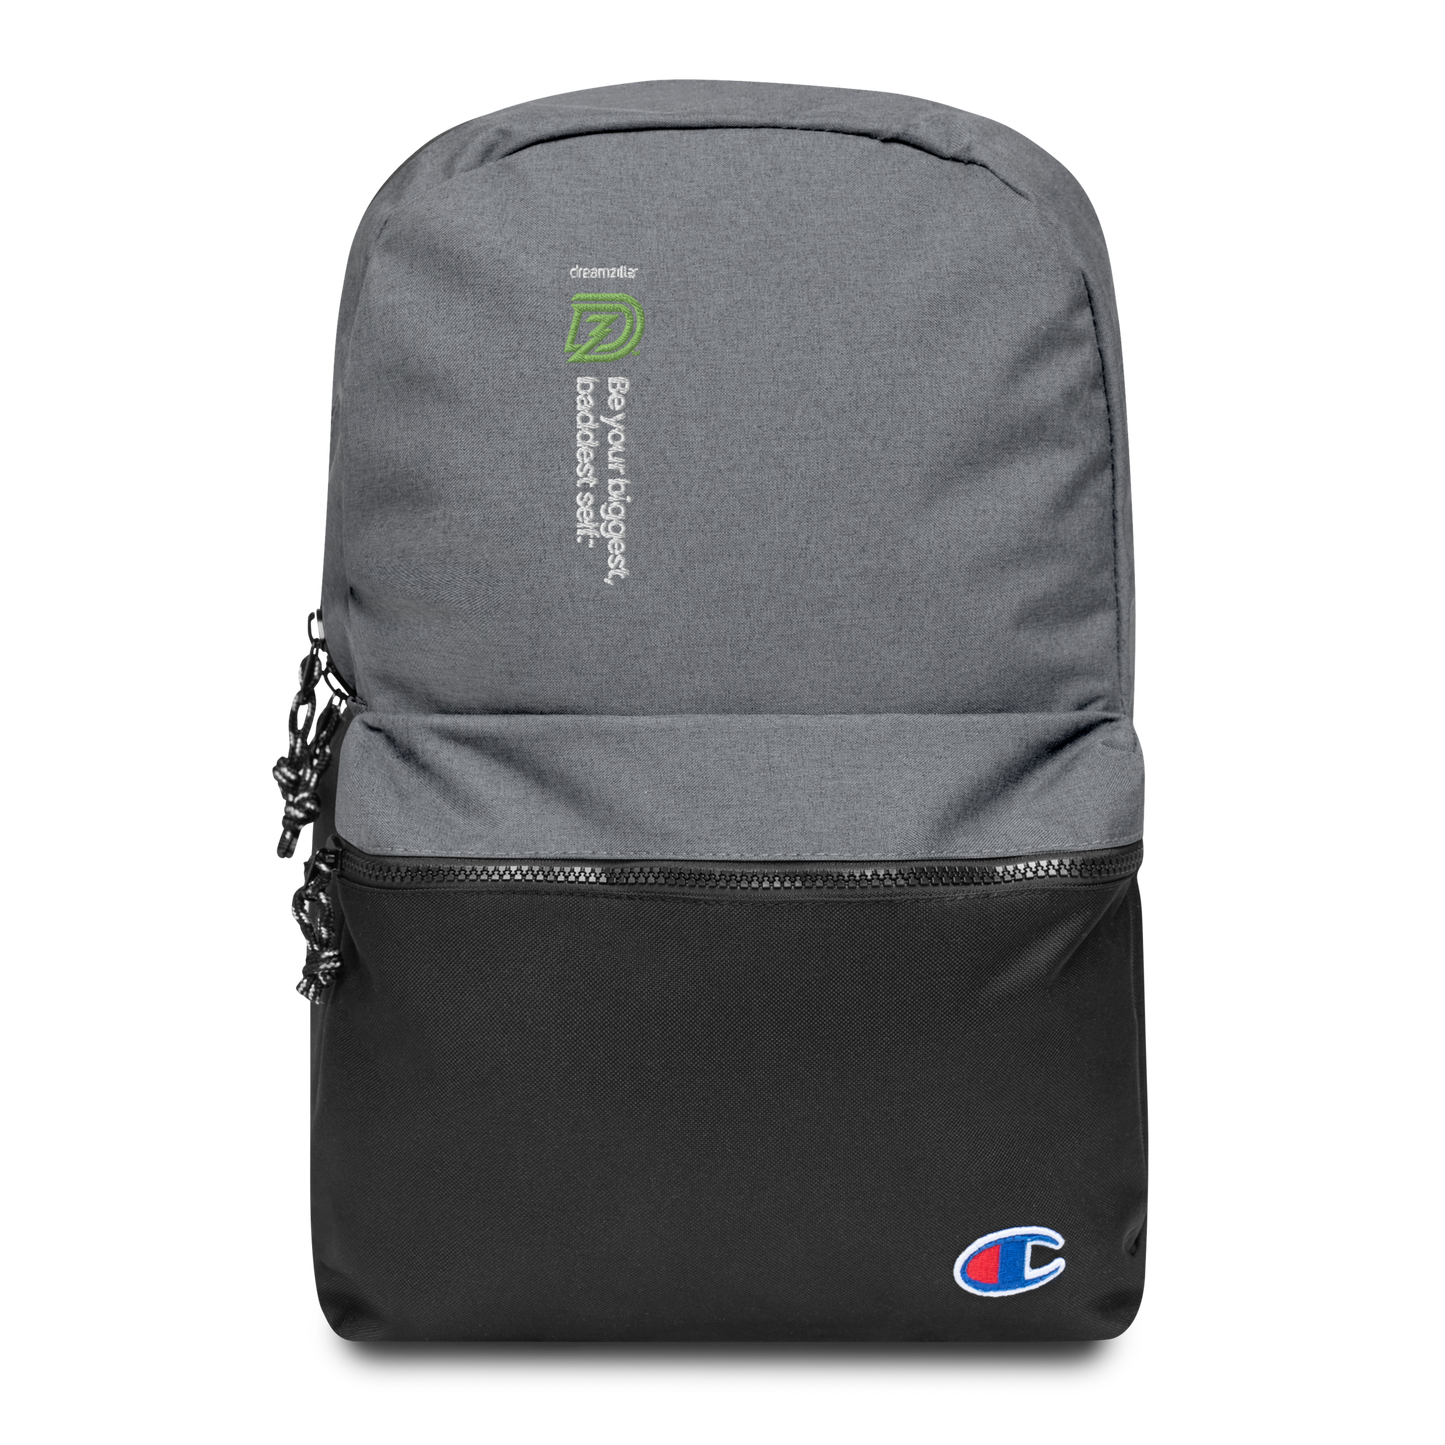 Embroidered DZ Champion Backpack in Heather Grey